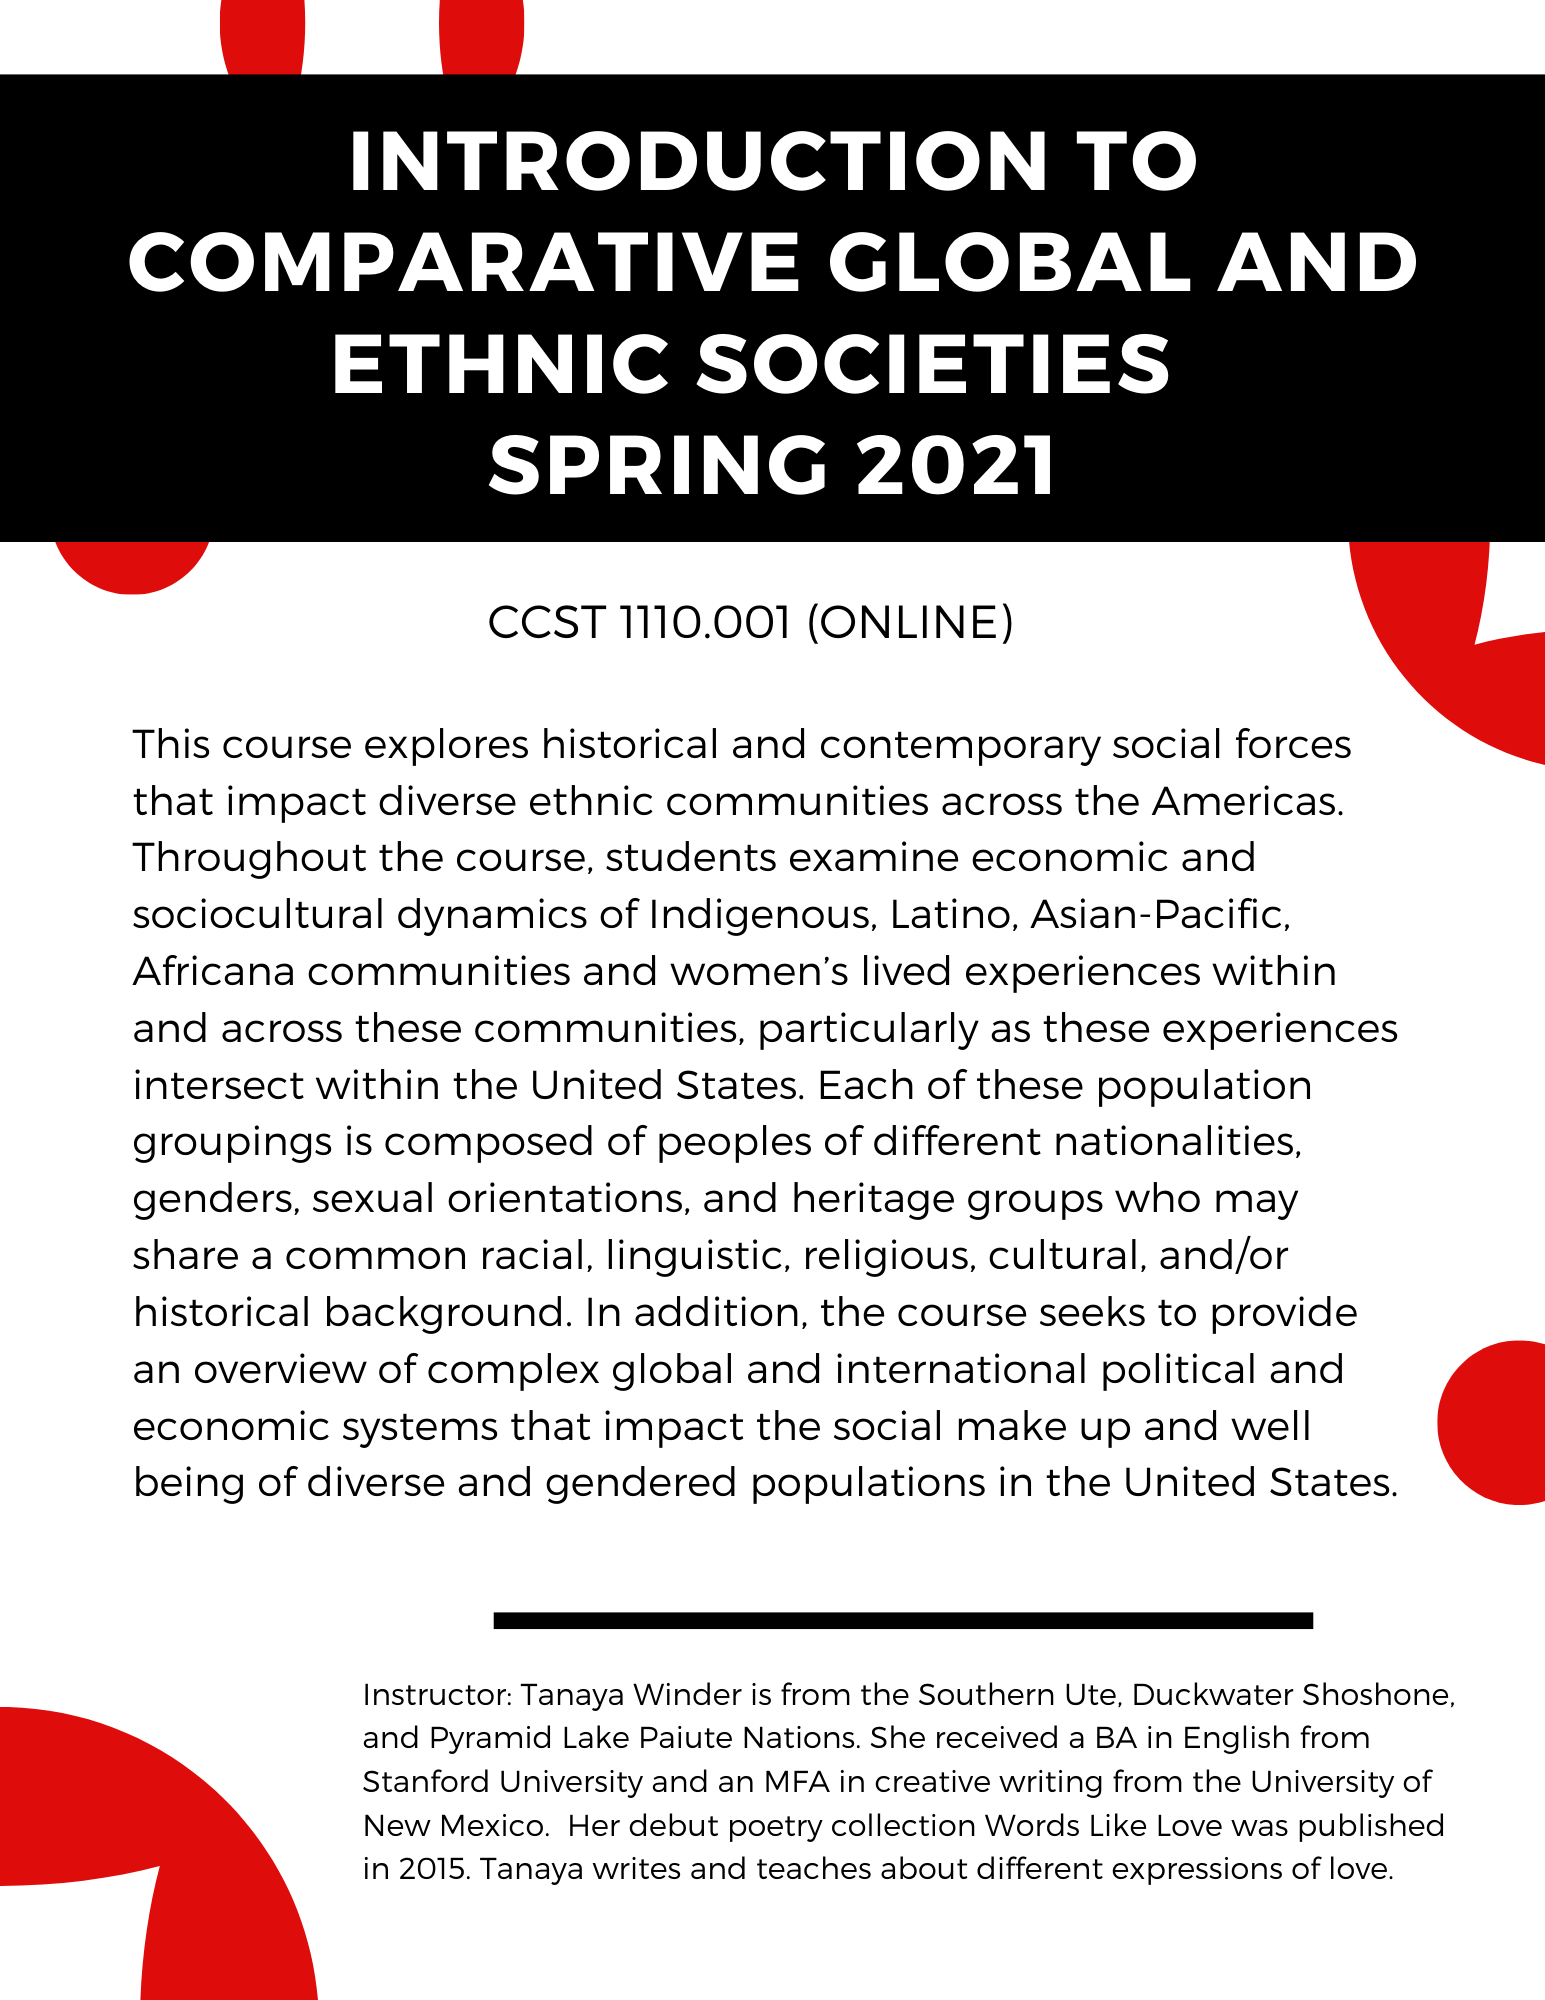 introduction-to-comparative-global-and-ethnic-societies--spring-2021.png